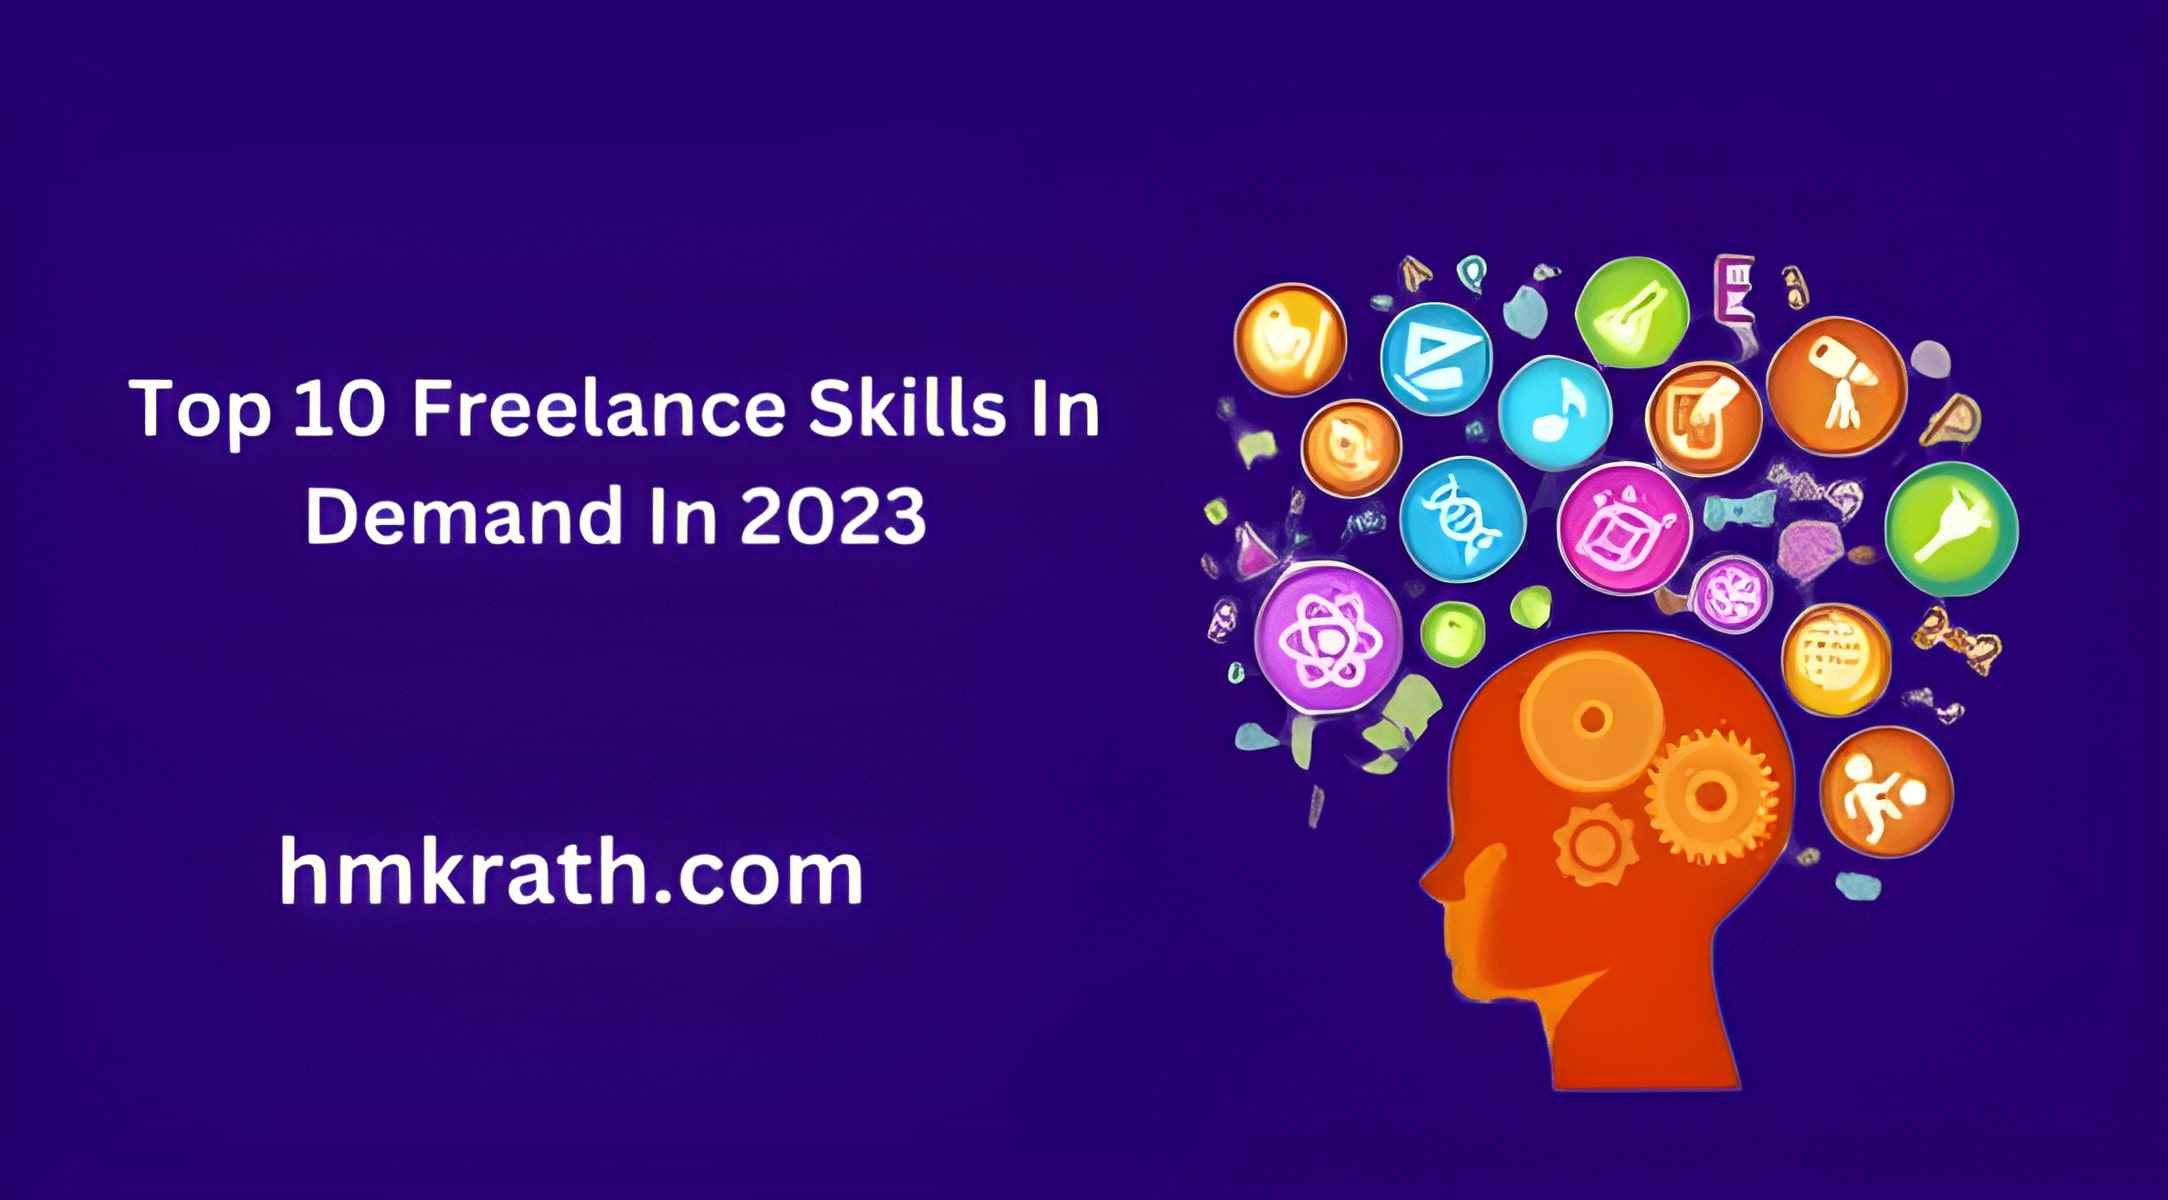 Top 10 Freelance Skills In Demand In 2023